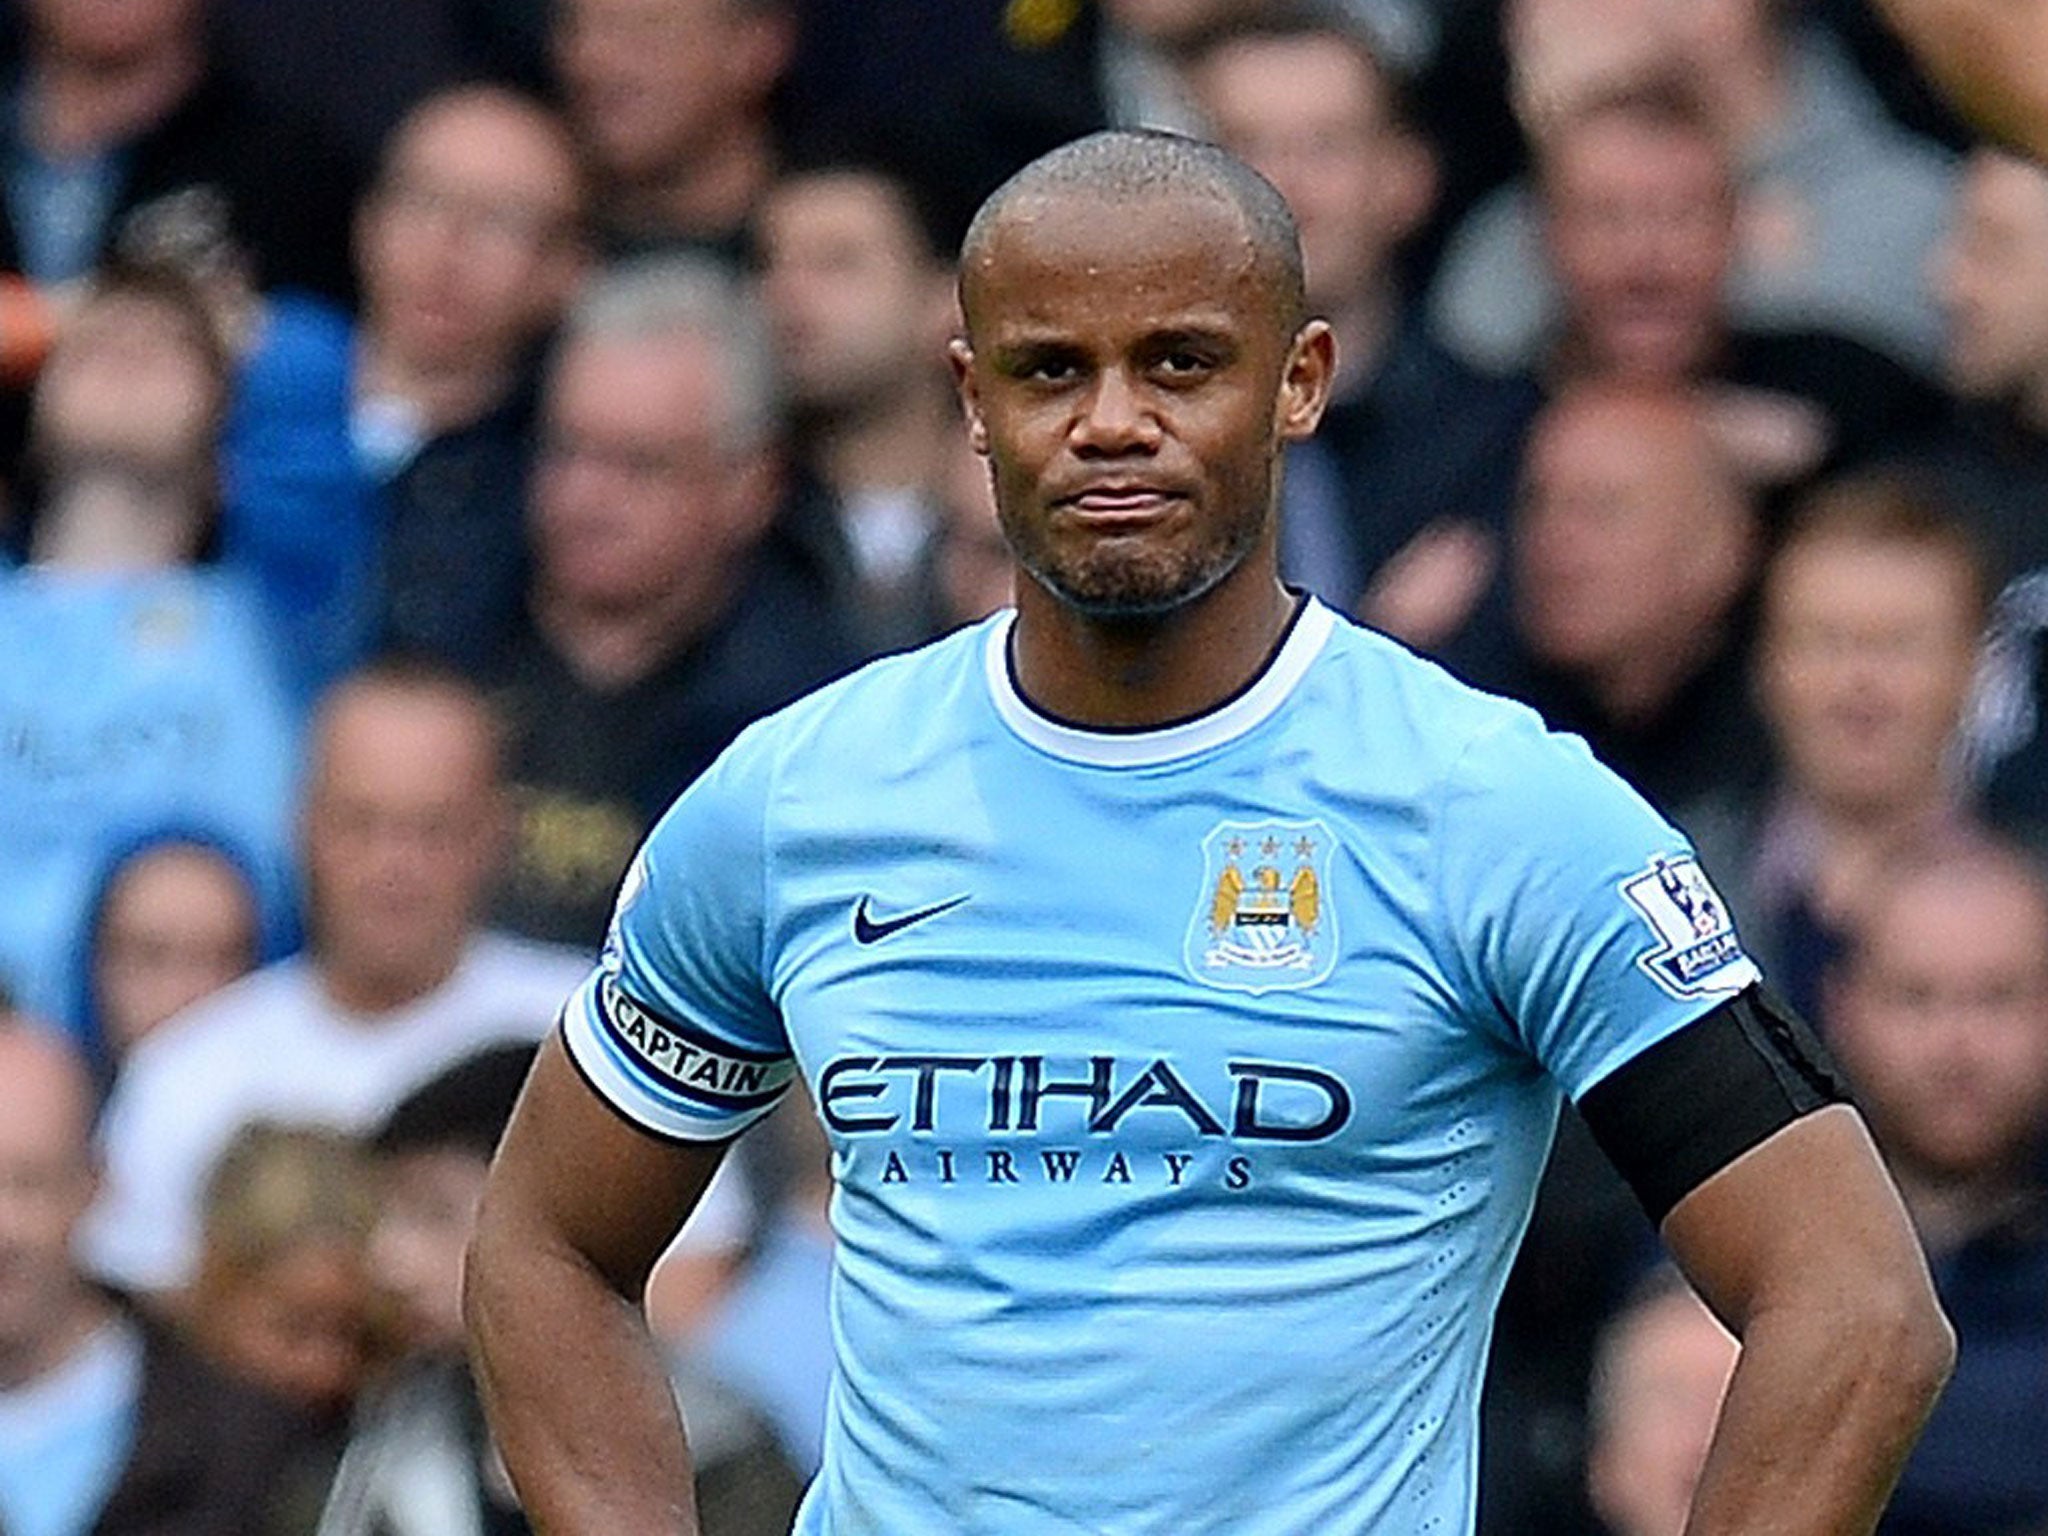 The Manchester City captain, Vincent Kompany, has plenty to ponder as his side fall to defeat at Liverpool